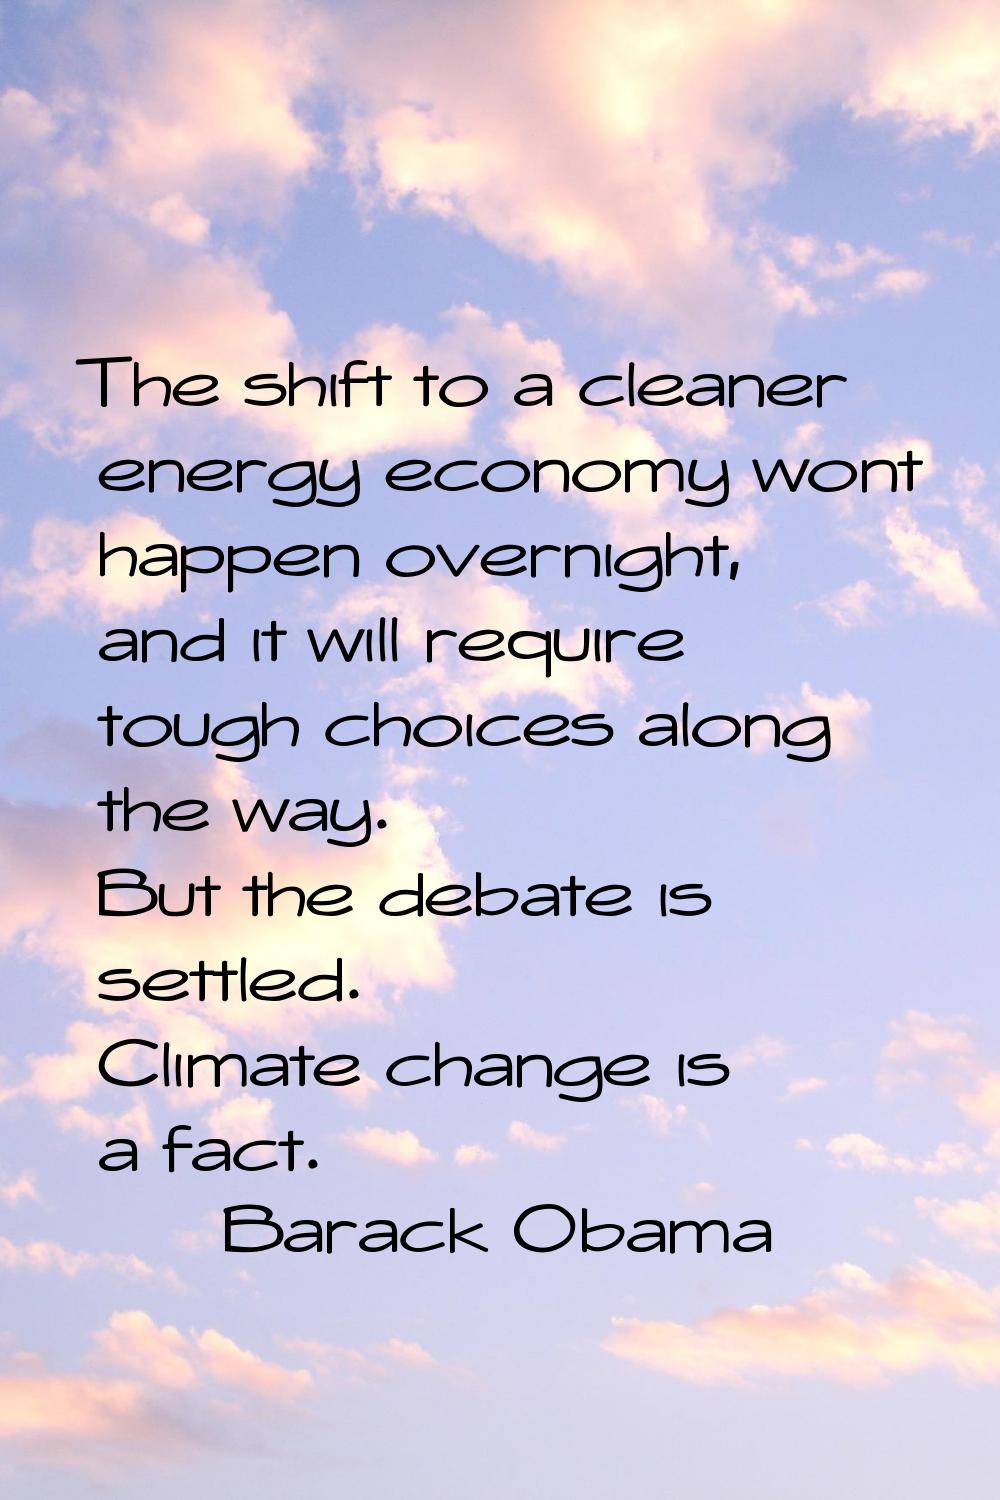 The shift to a cleaner energy economy wont happen overnight, and it will require tough choices alon